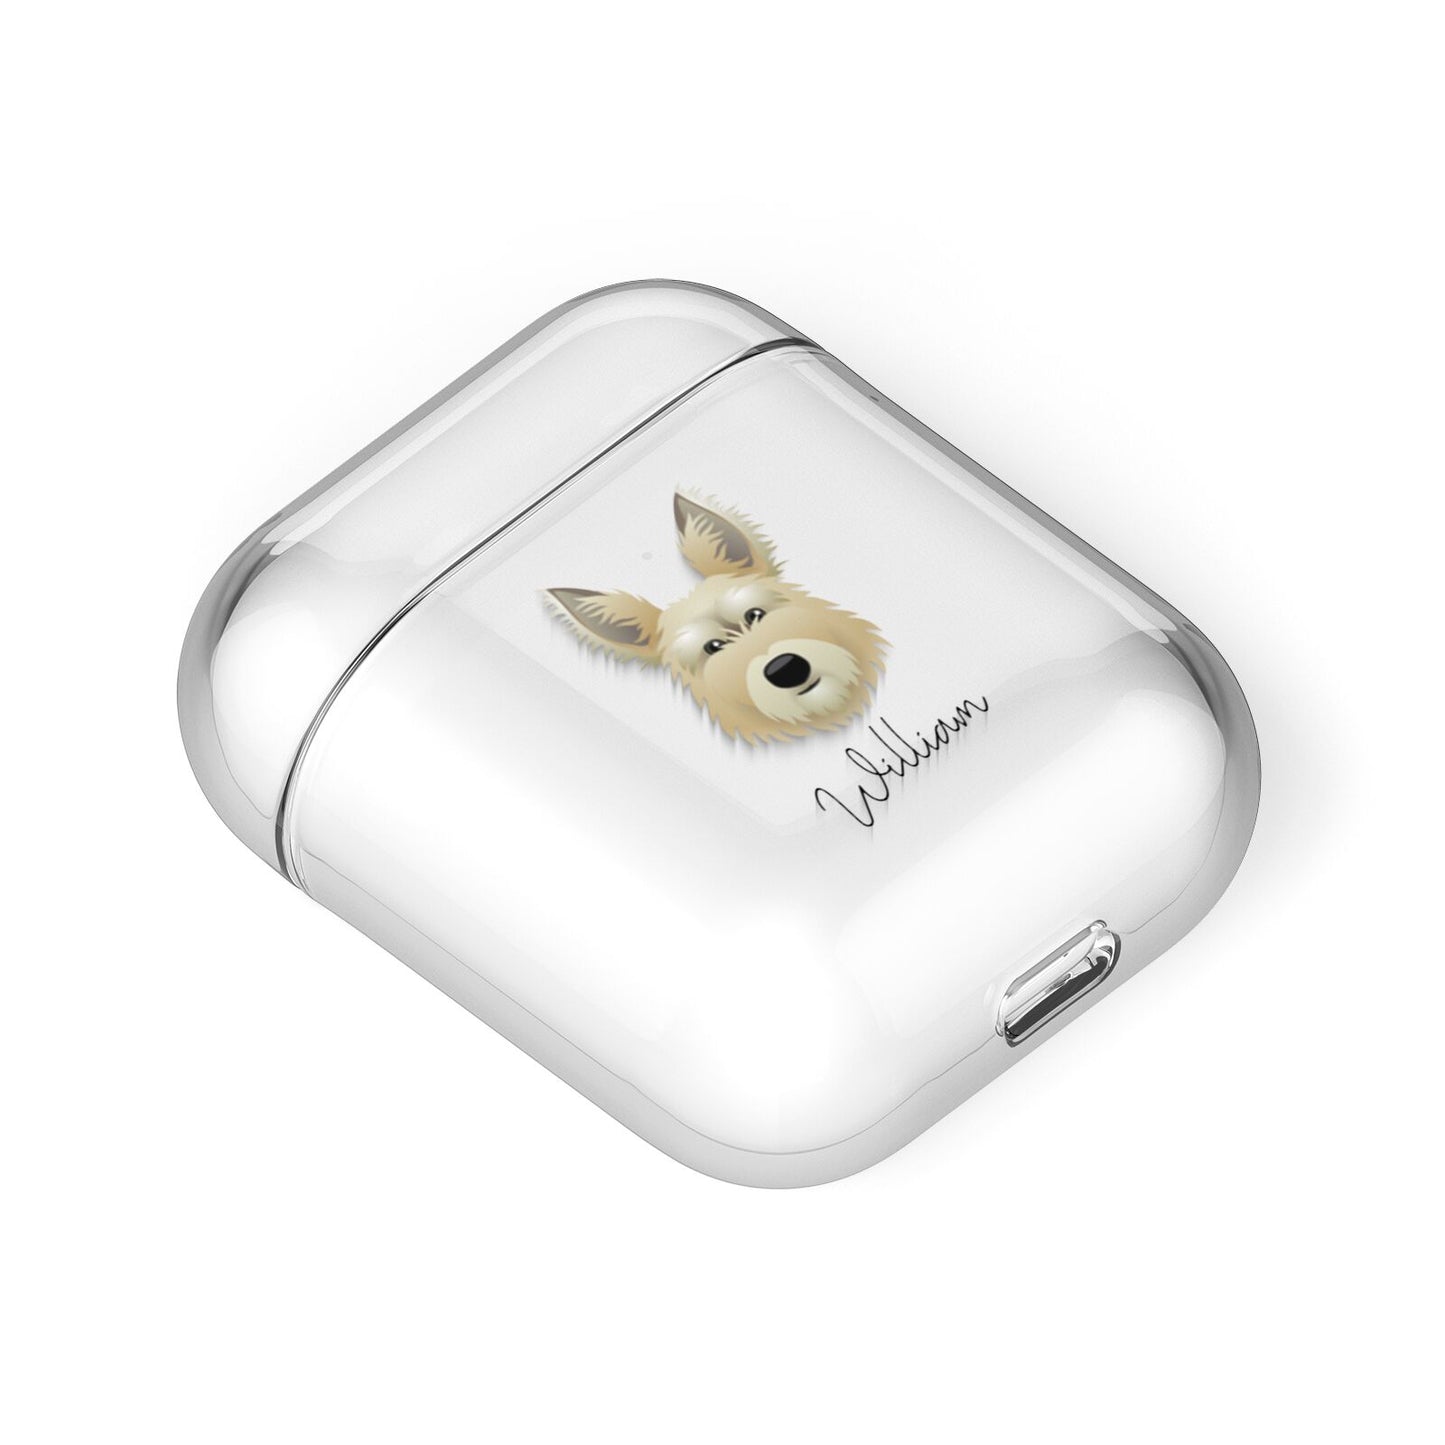 Picardy Sheepdog Personalised AirPods Case Laid Flat